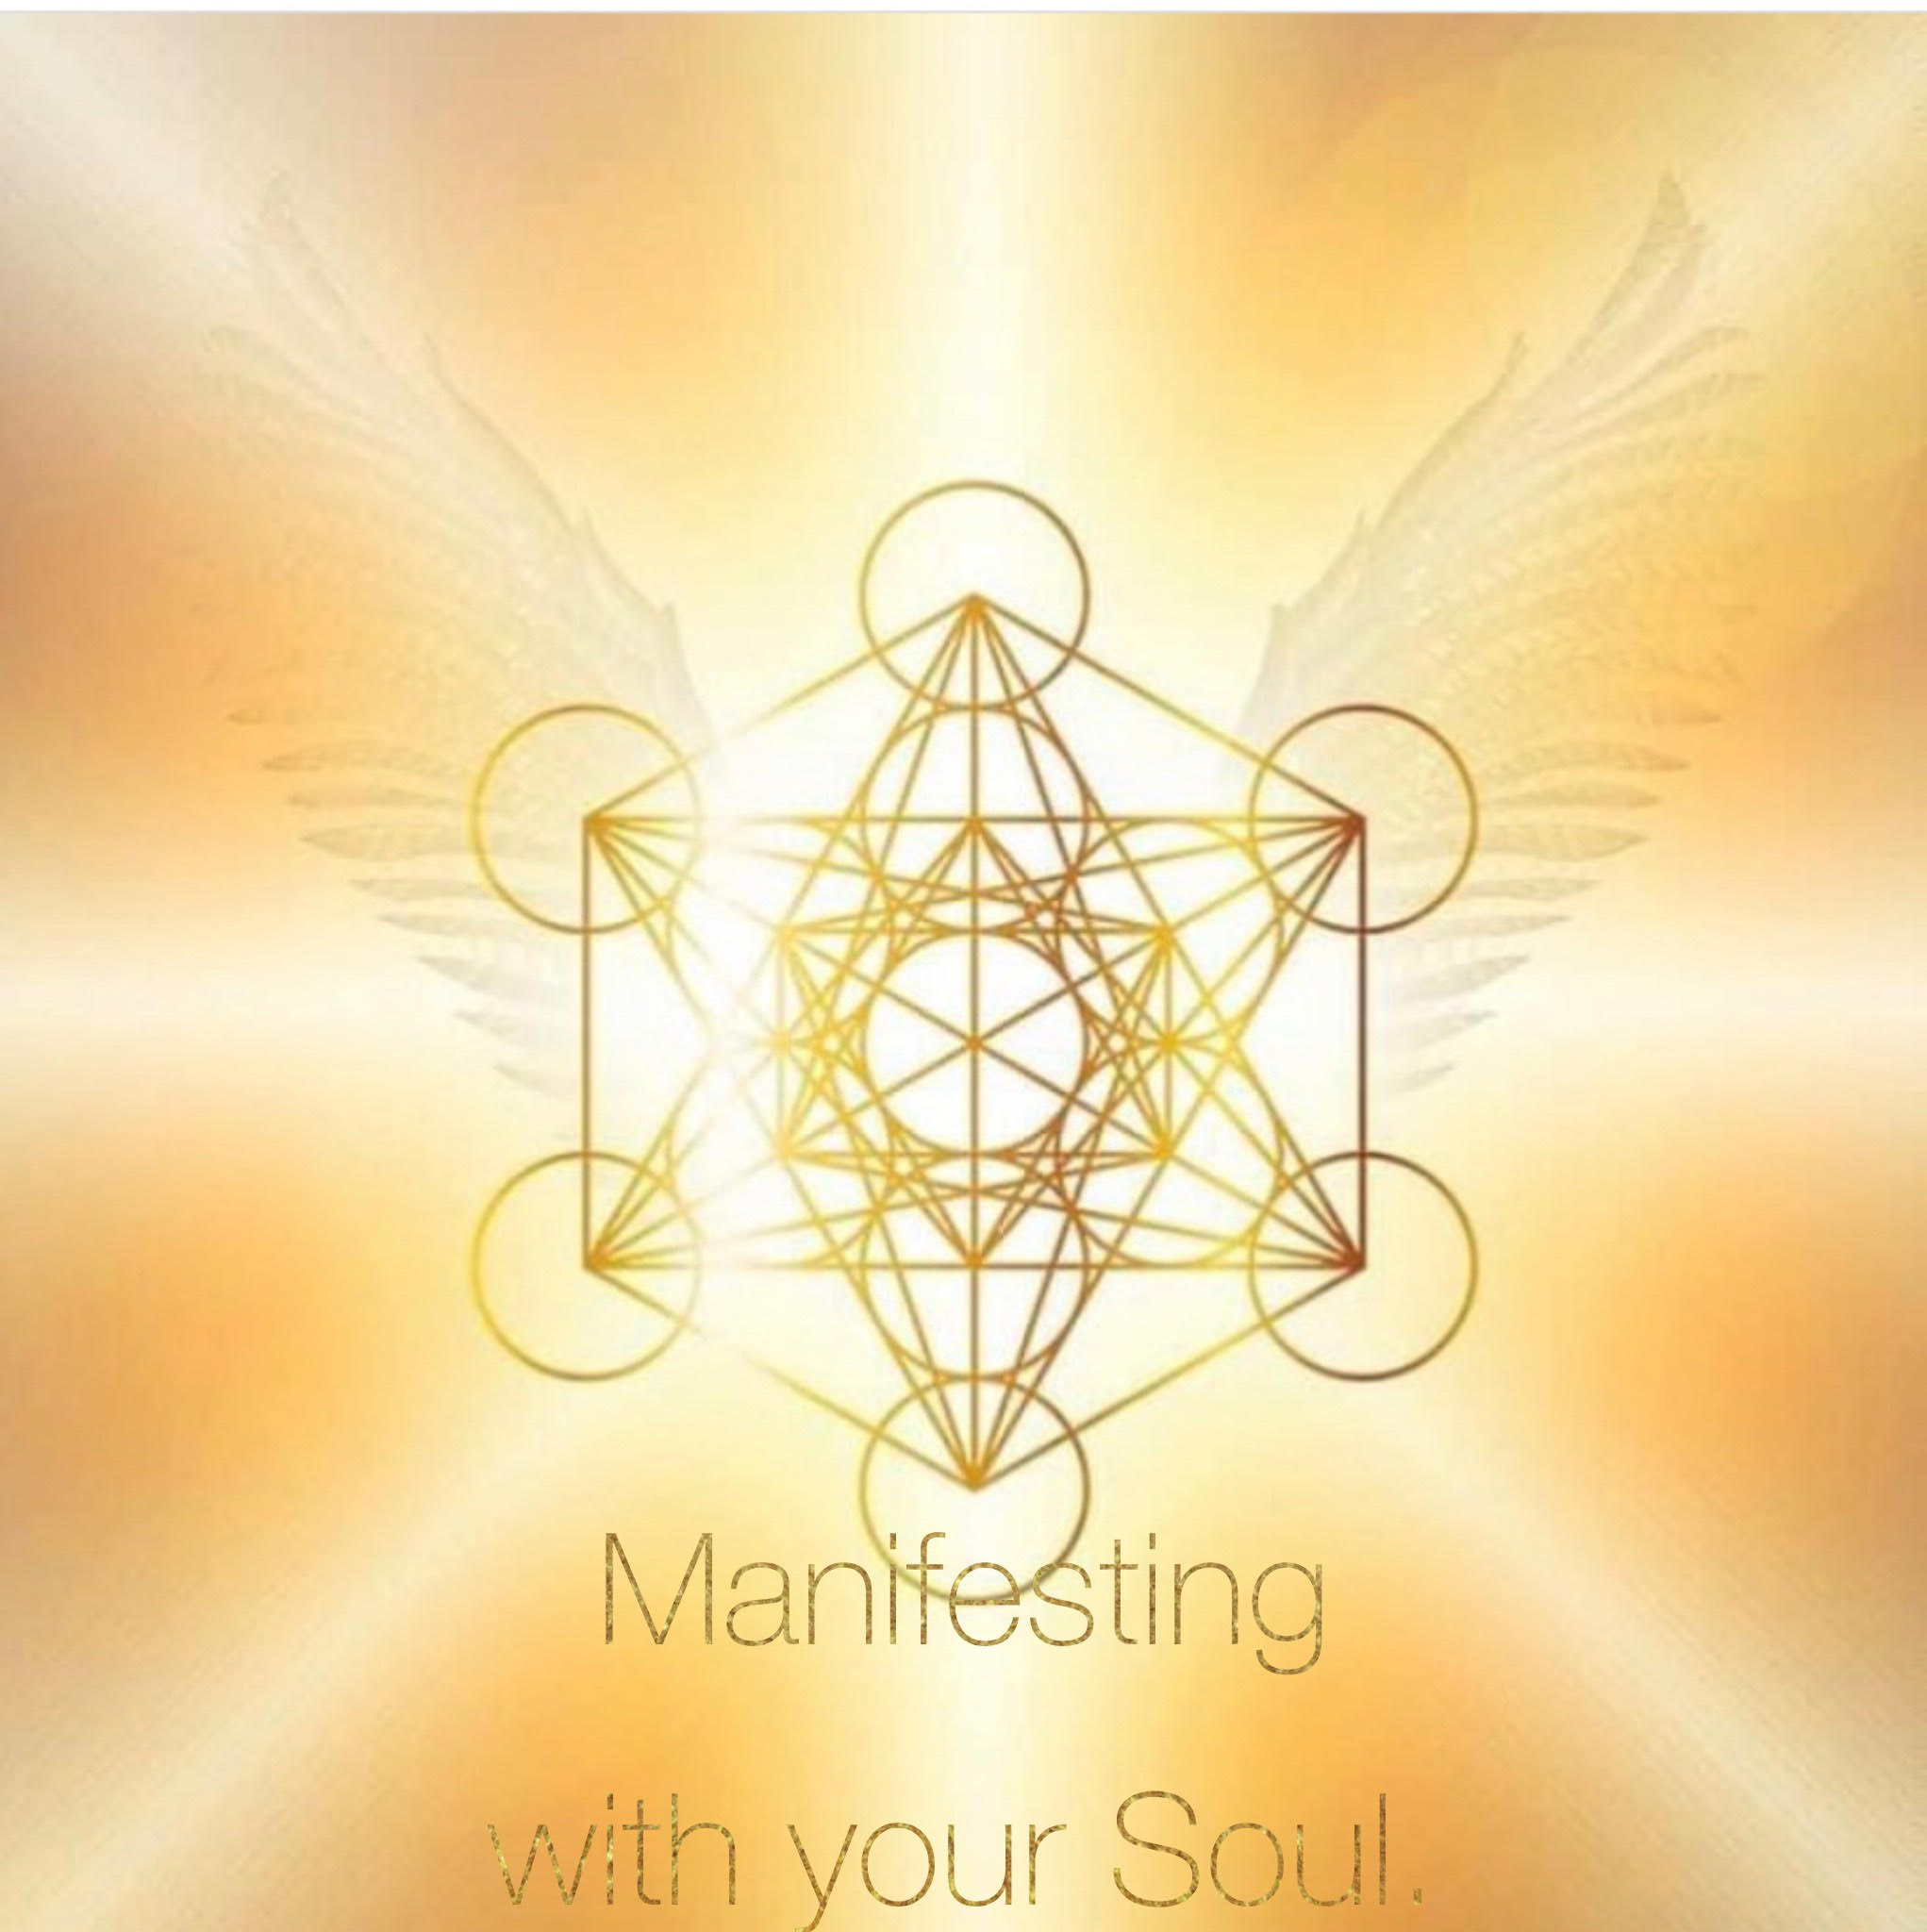 Manifesting with your Soul